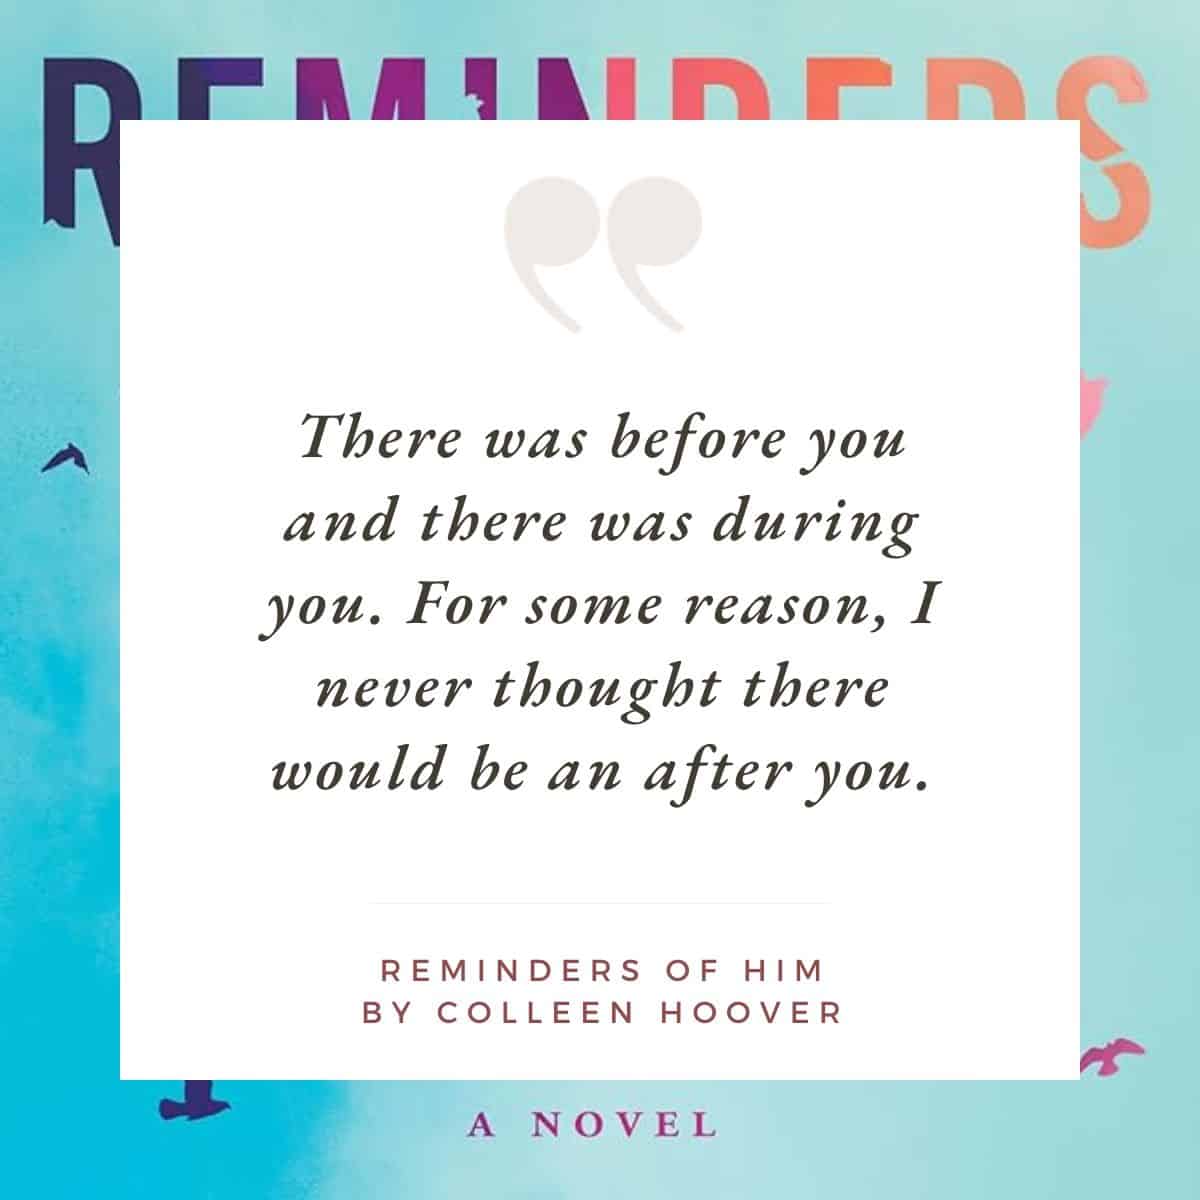 “There was before you and there was during you” Reminders of Him Quote